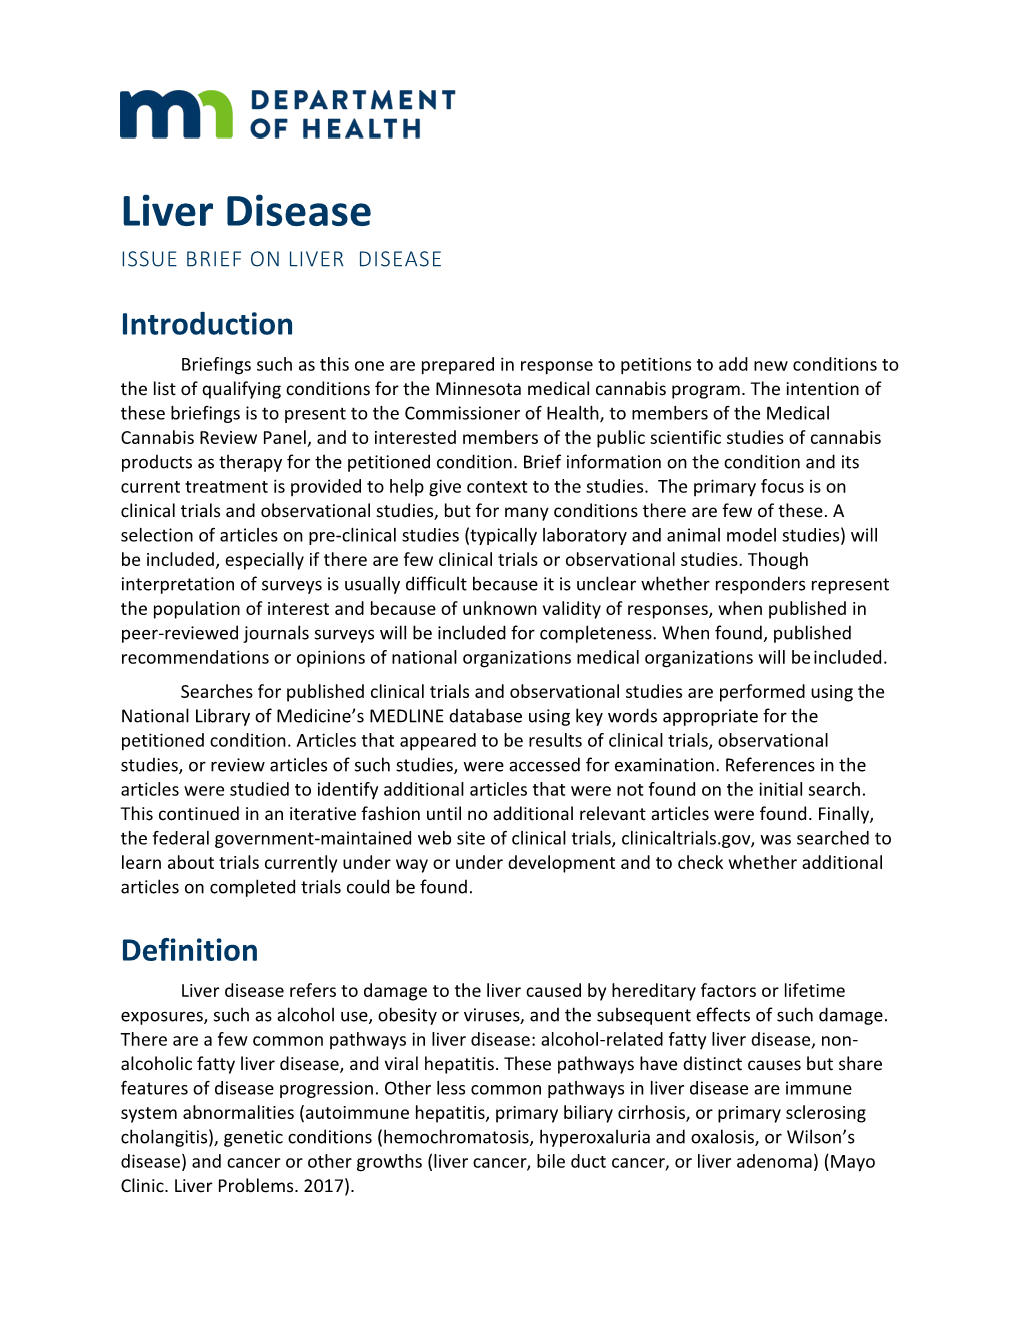 Liver Disease ISSUE BRIEF on LIVER DISEASE